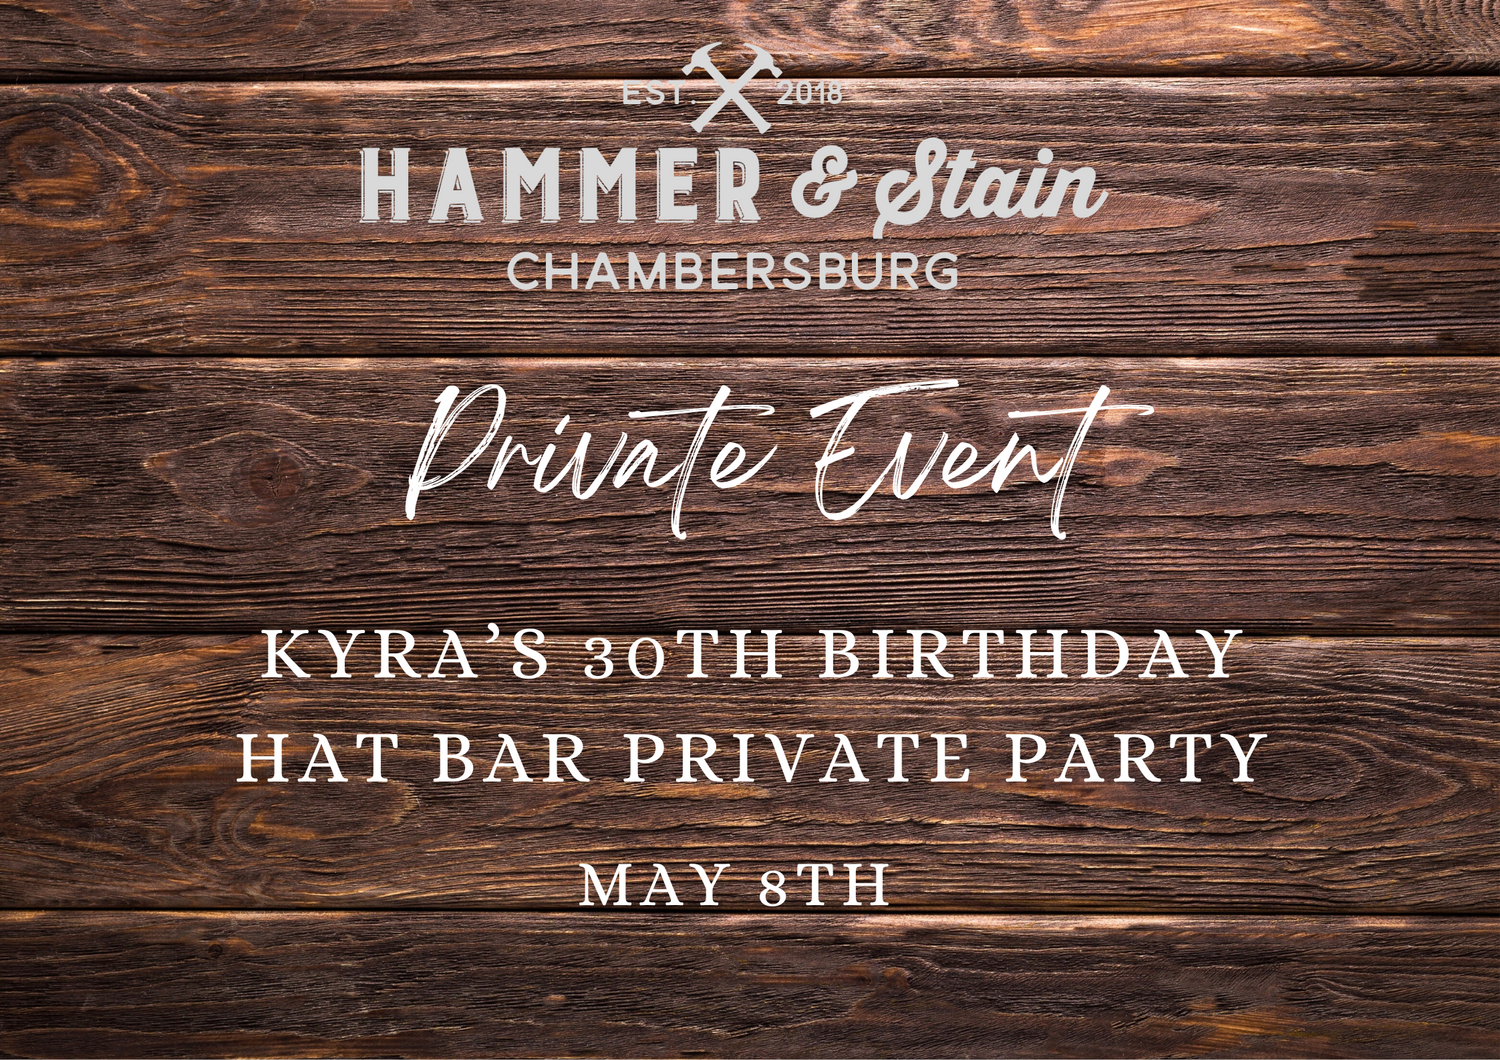 05/08/24 Kyra's 30th Birthday Hat Bar Private Party 6pm